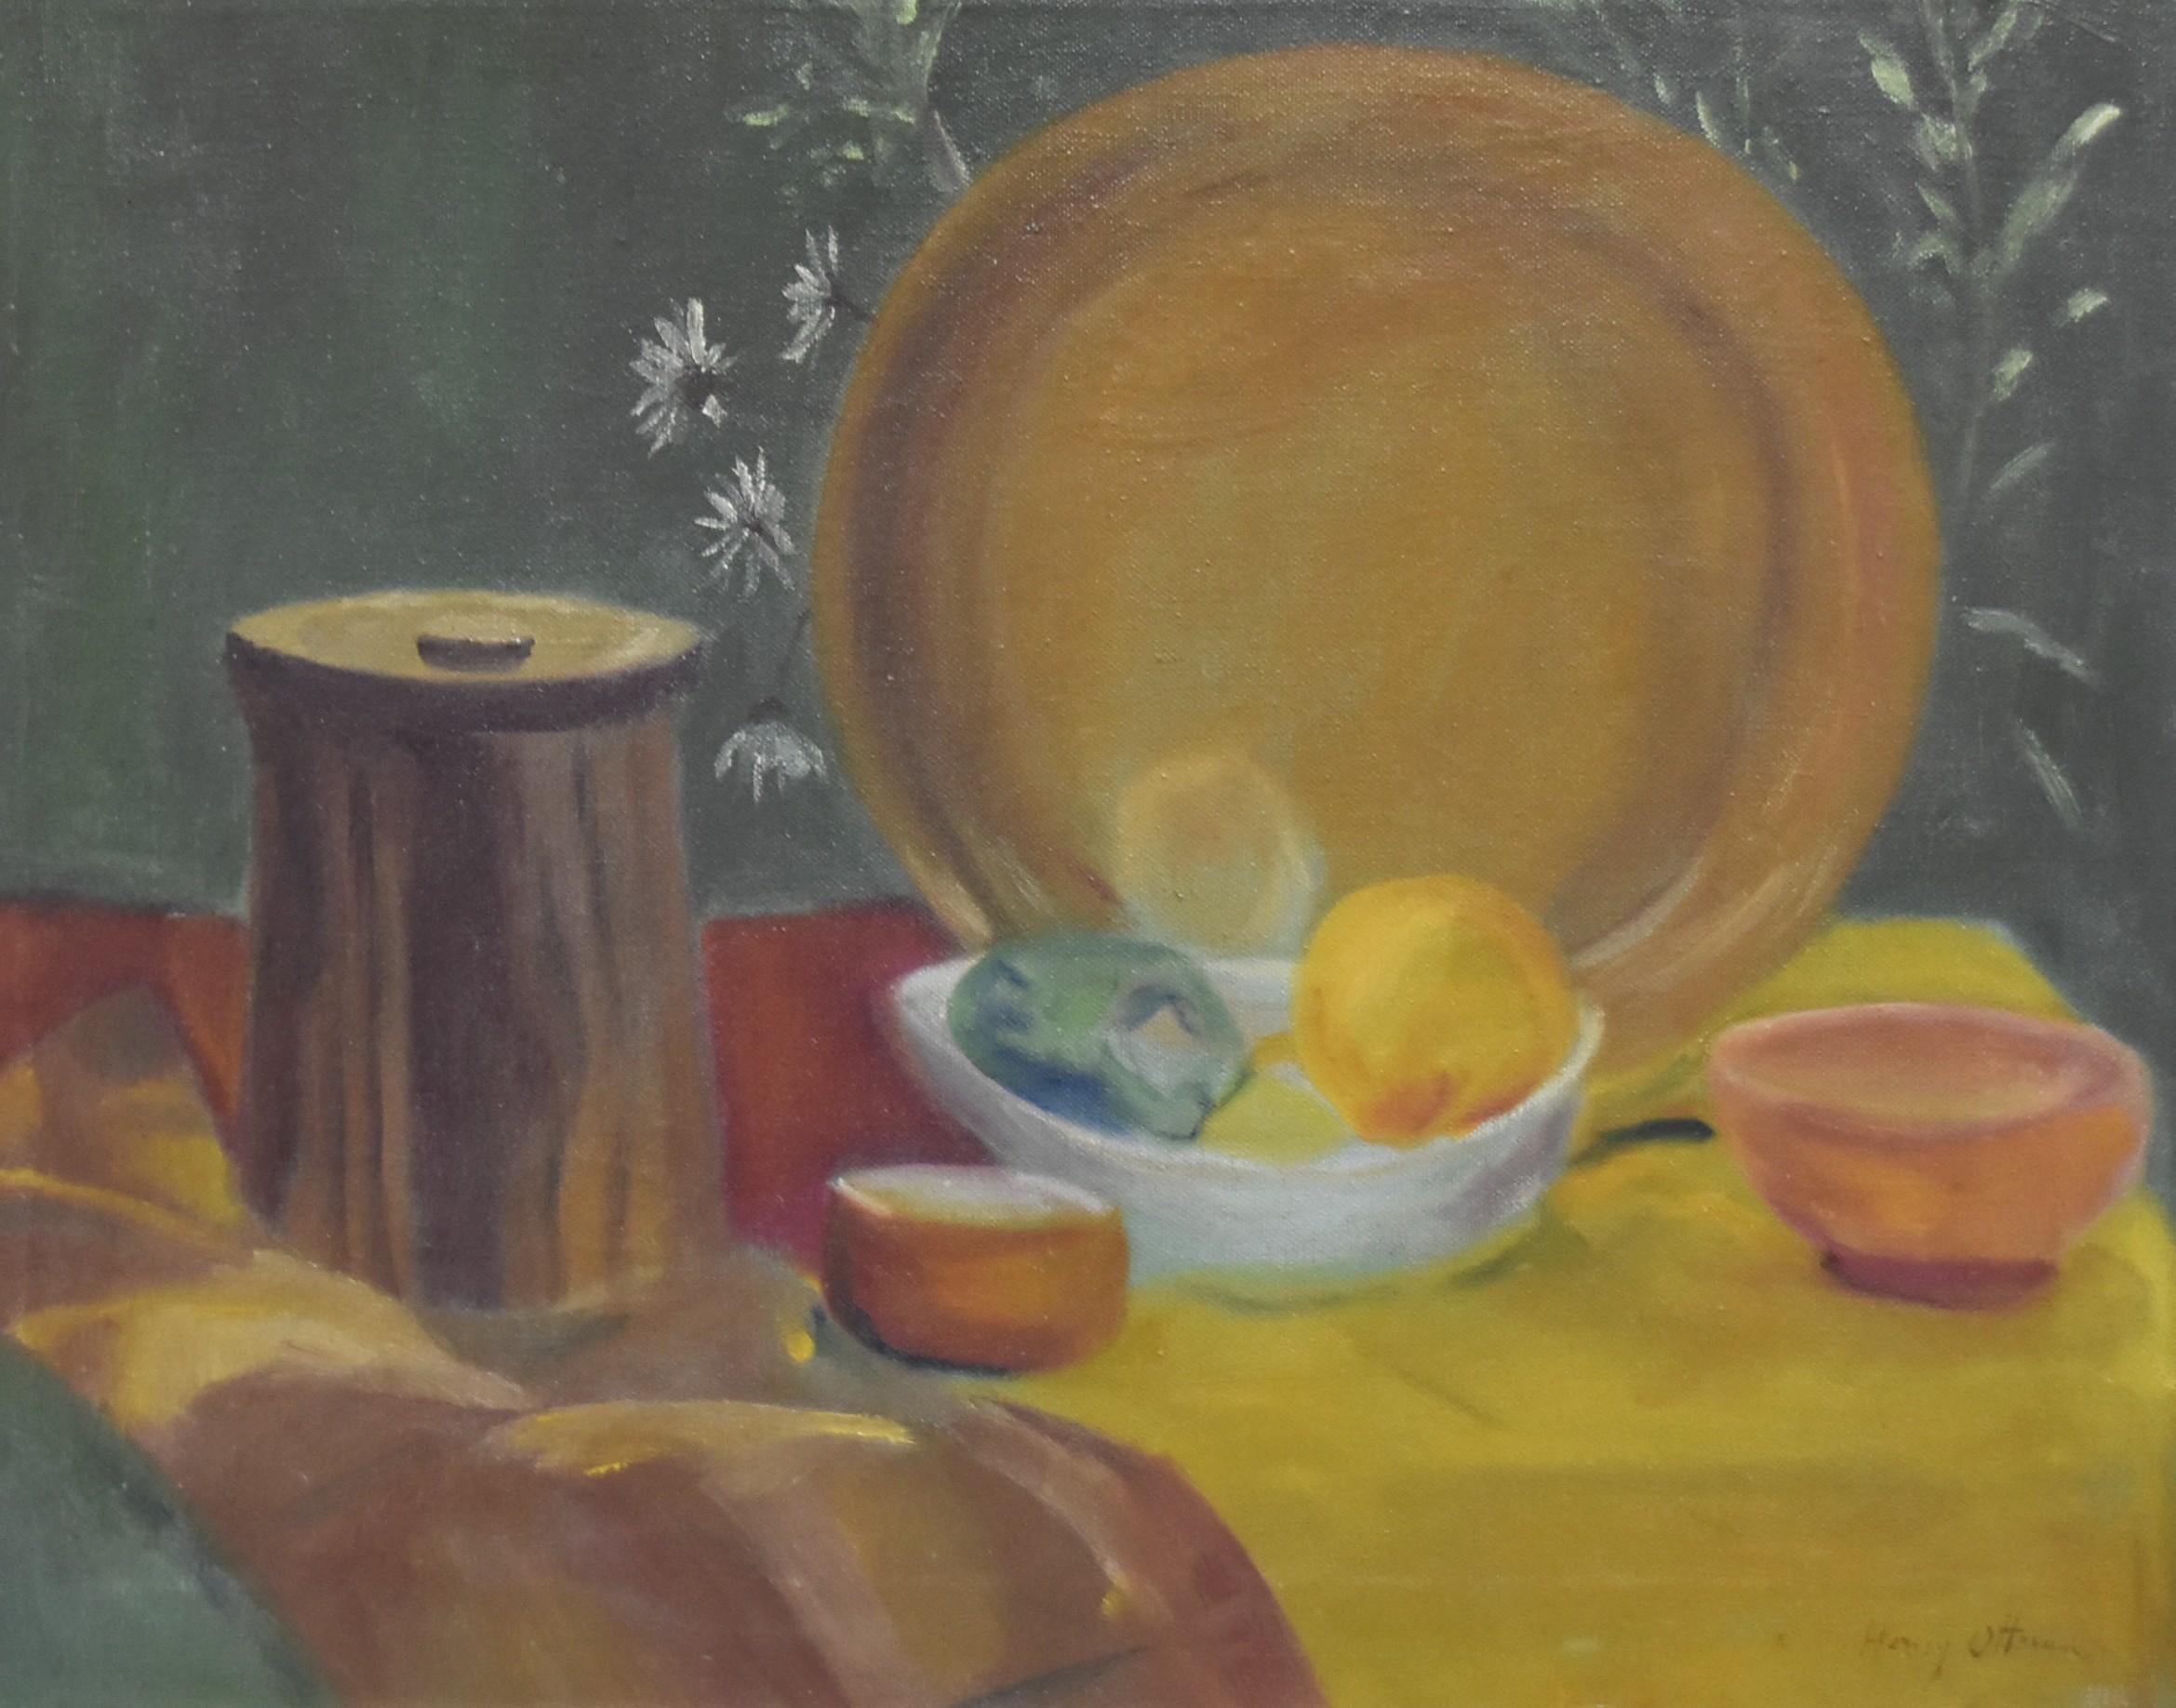 Henri Ottmann (1877-1927)  
A Still life, 
signed lower right
Oil on canvas
41 x 51 cm
Framed : 53.5 x 63.5 cm

Another fine example of Henry Ottmann's original art, this still life is strikingly modern, with a particularly soft and charming